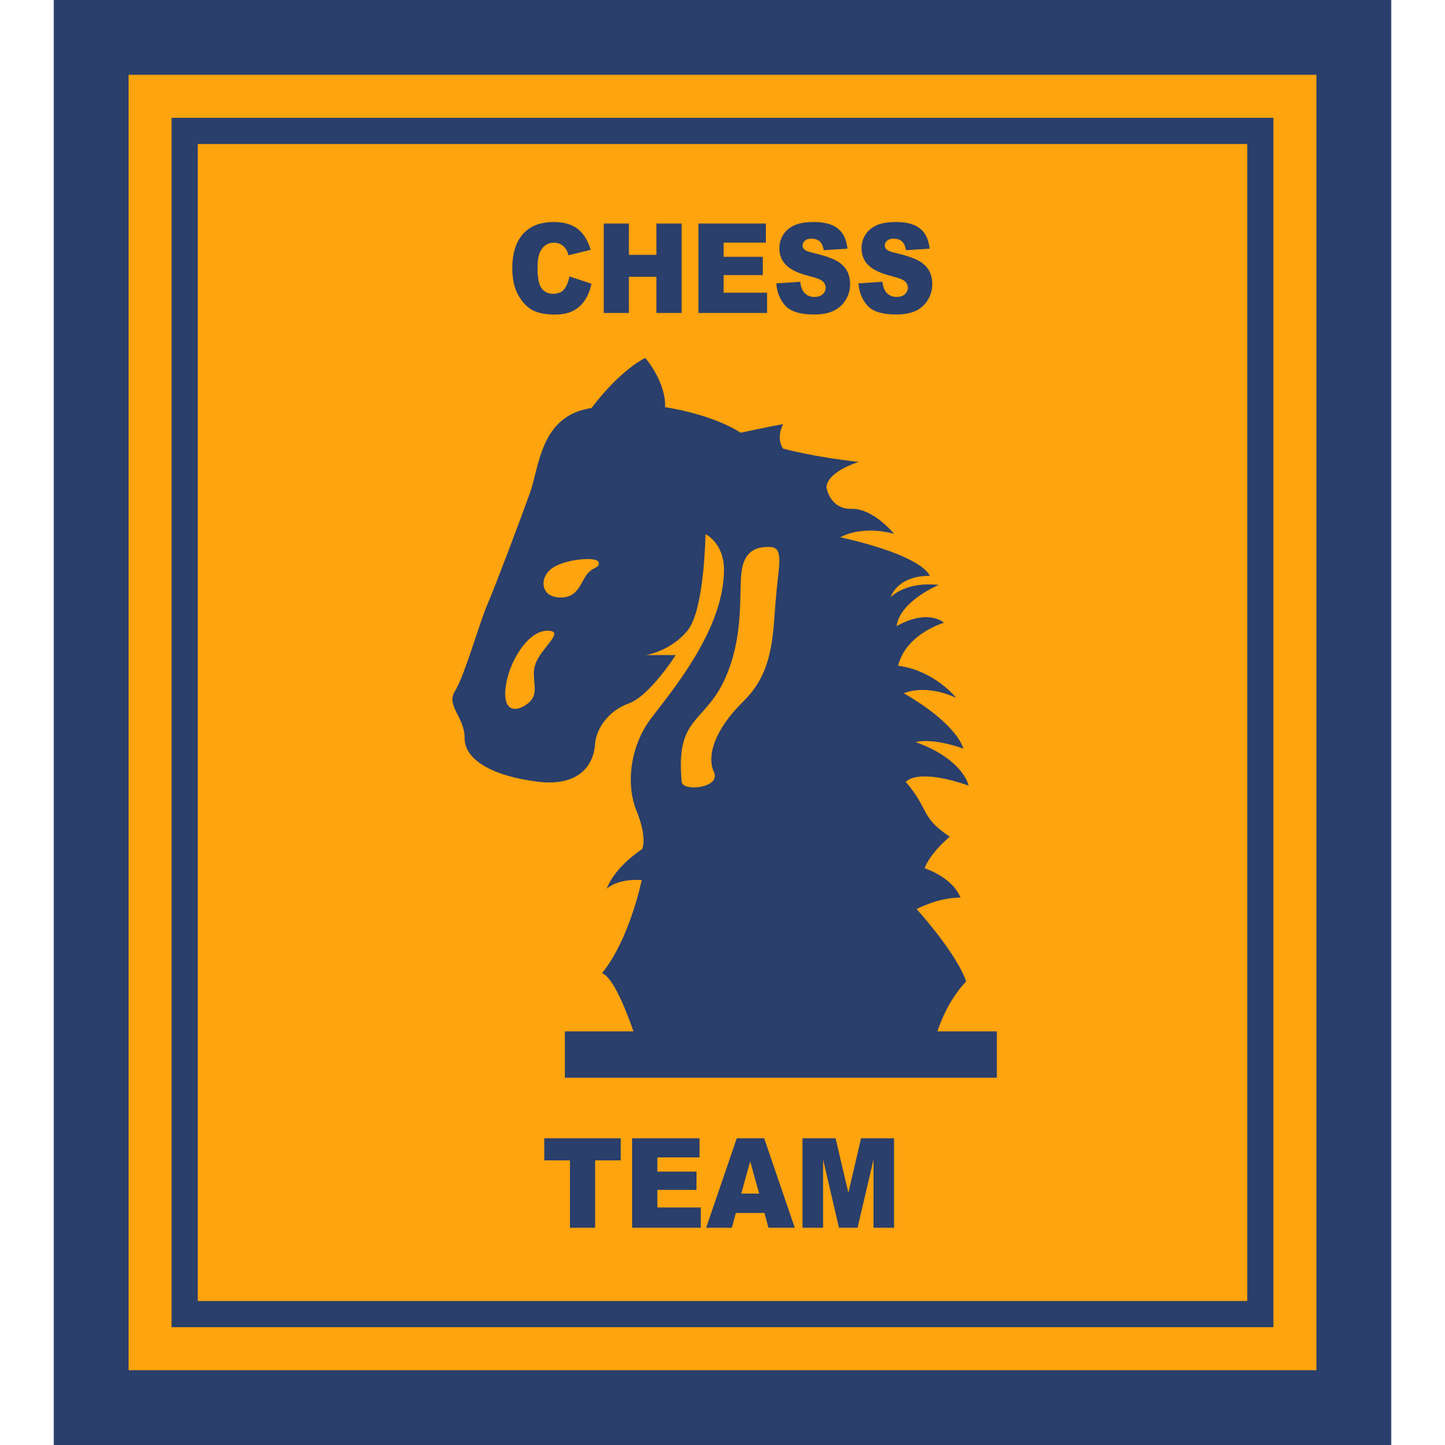 Chess Sleeve Patch